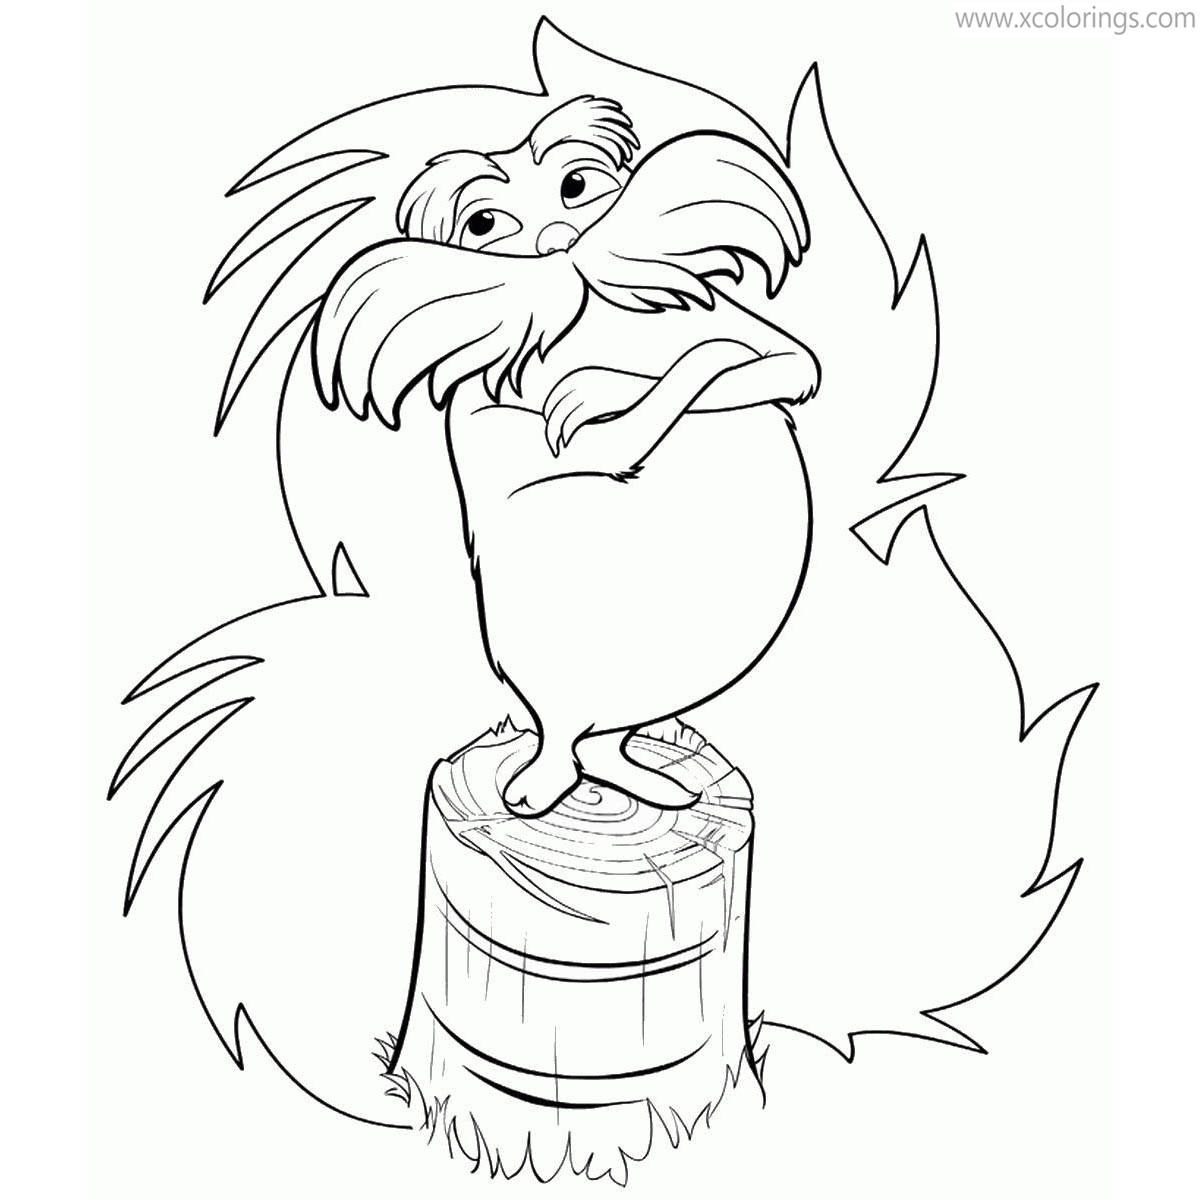 Free Lorax and Truffula Tree Coloring Pages printable